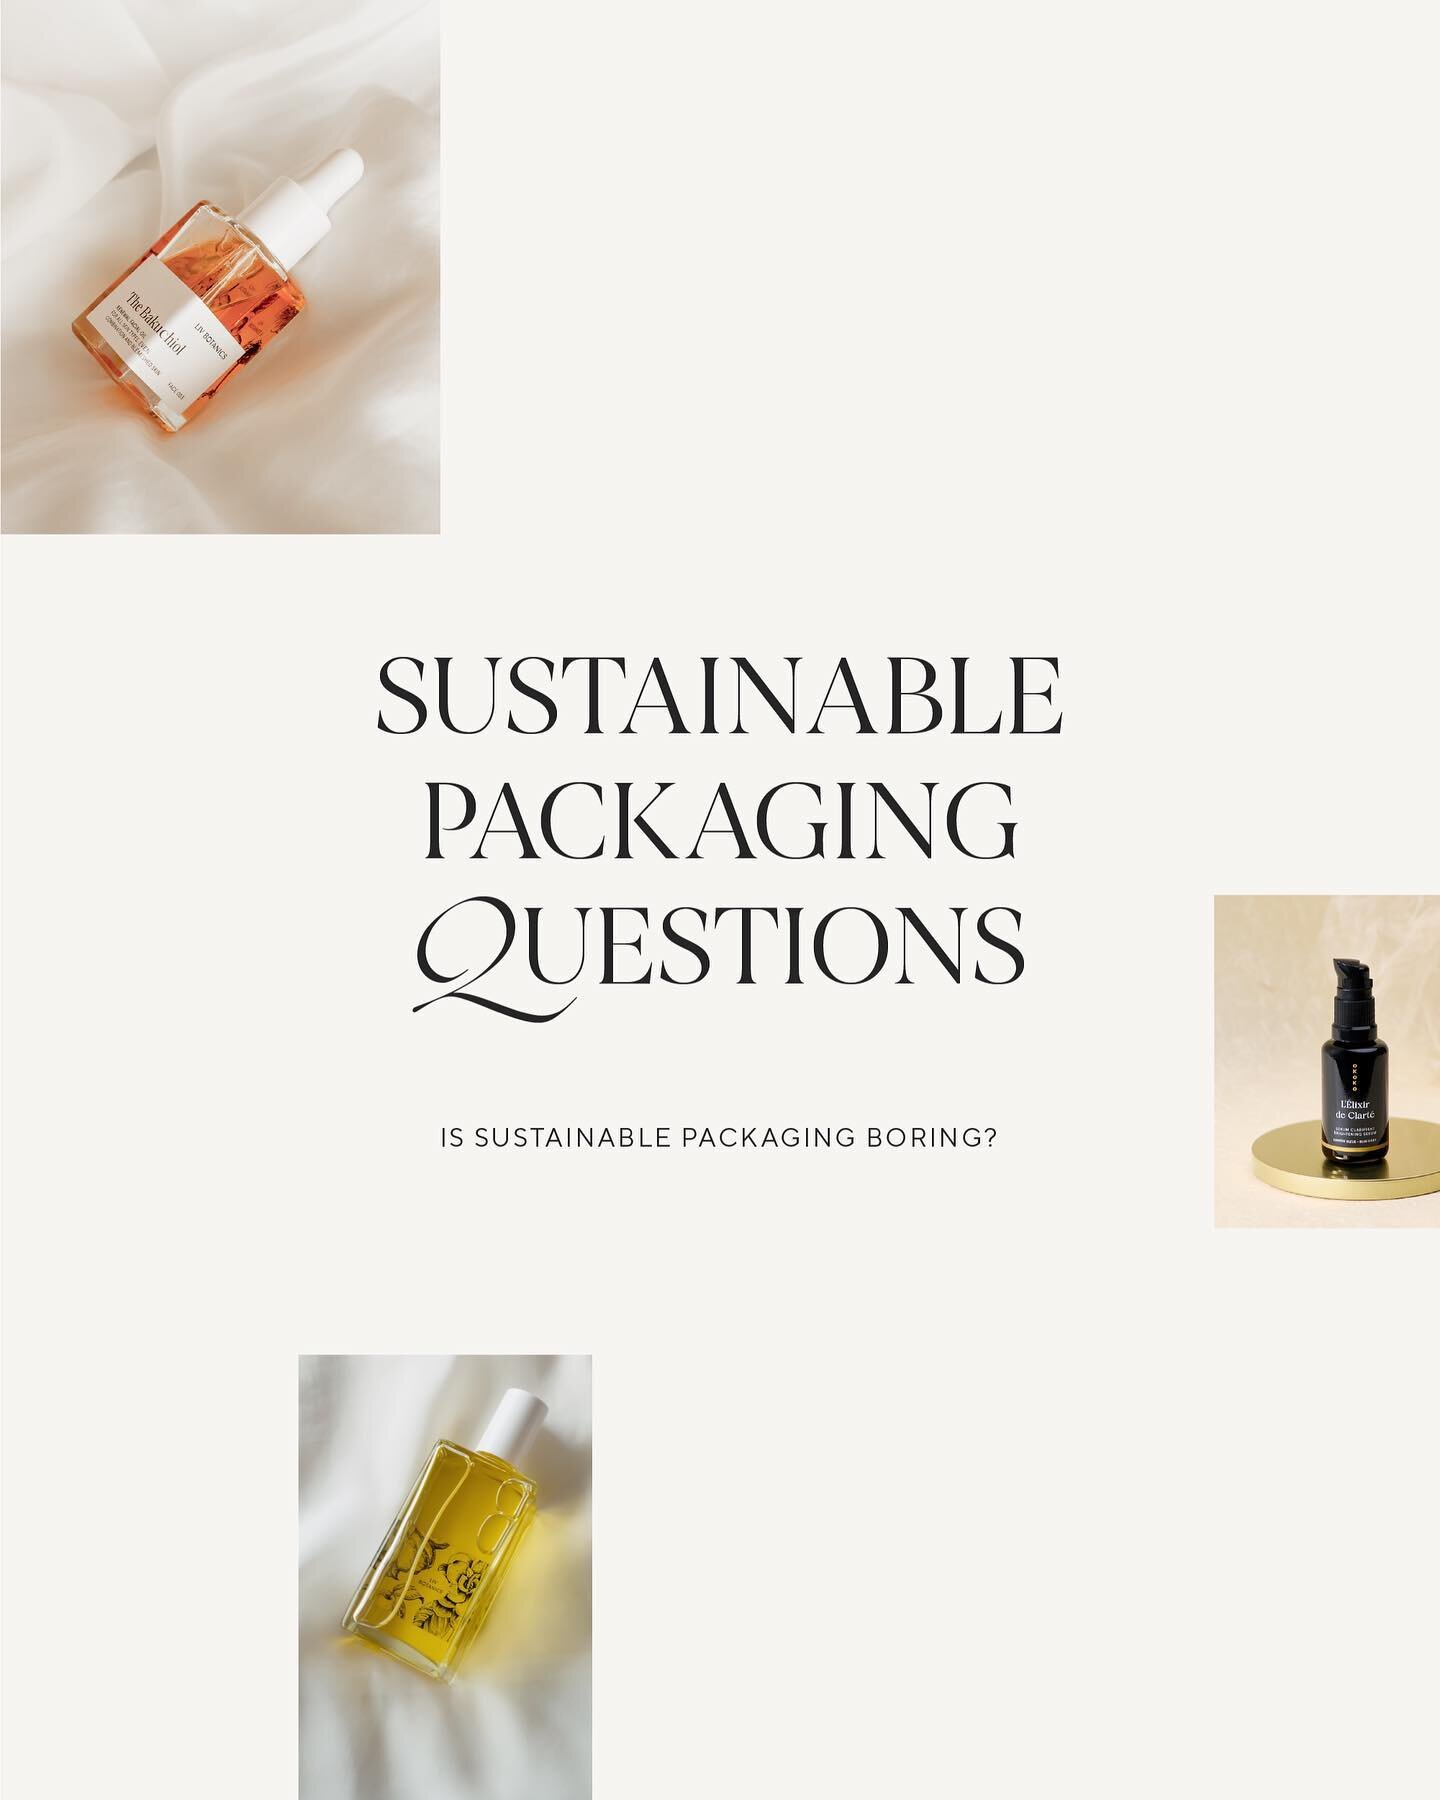 Is sustainable packaging boring?

Absolutely not. Sustainable packaging doesn't mean plain, boring and with a tree-hugging vibe. You can get really creative and use this as an opportunity to show off your branding. 

Swapping to eco-friendly packagin